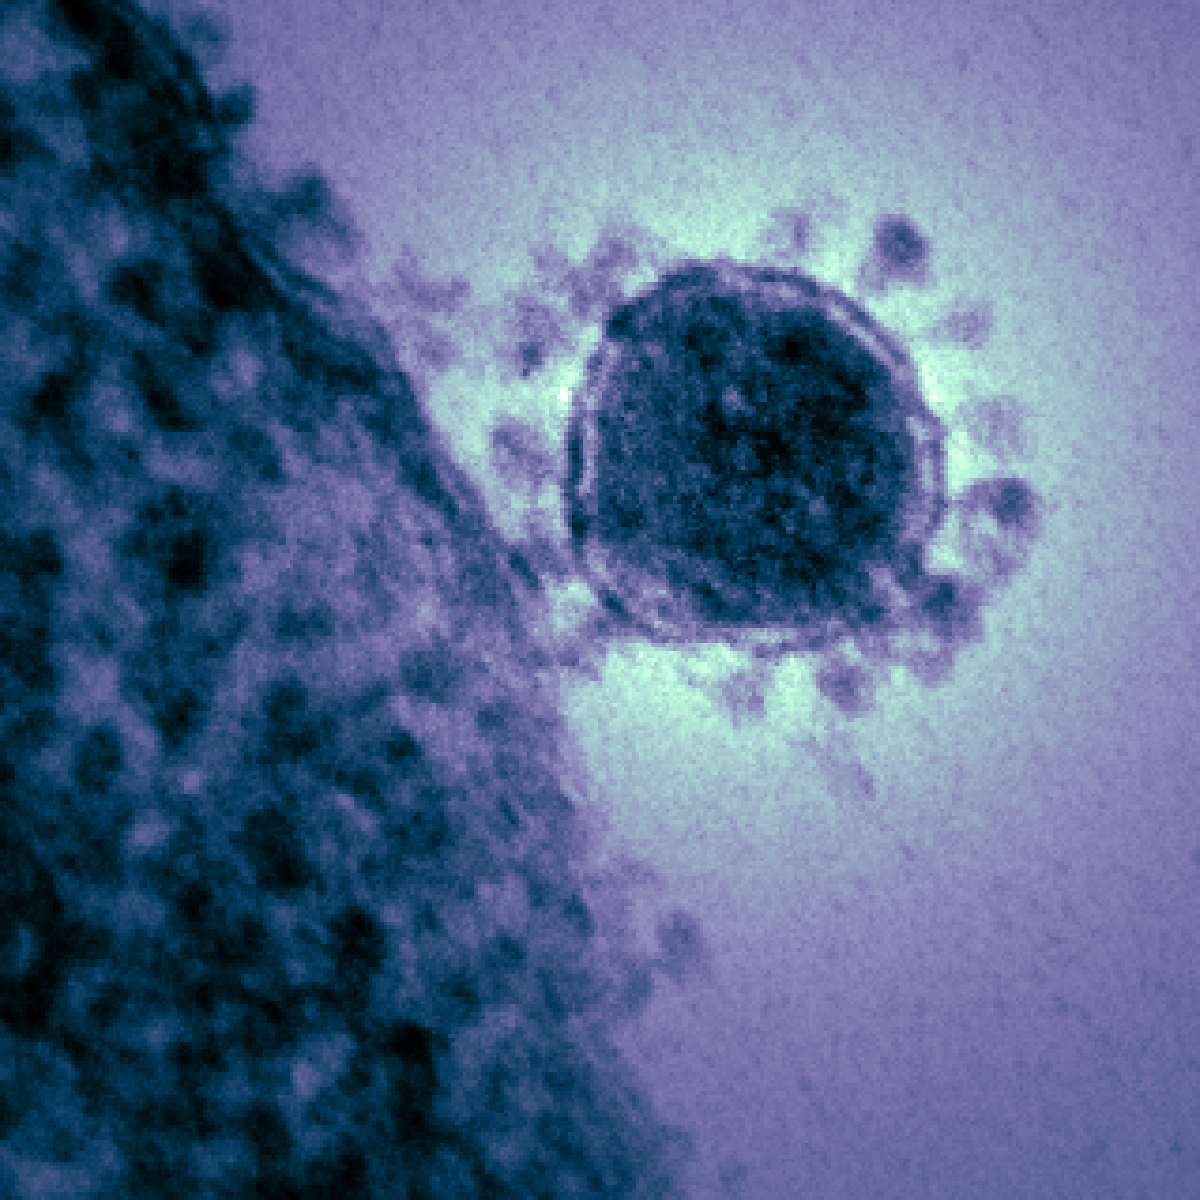 Middle_East_respiratory_syndrome-related_coronavirus